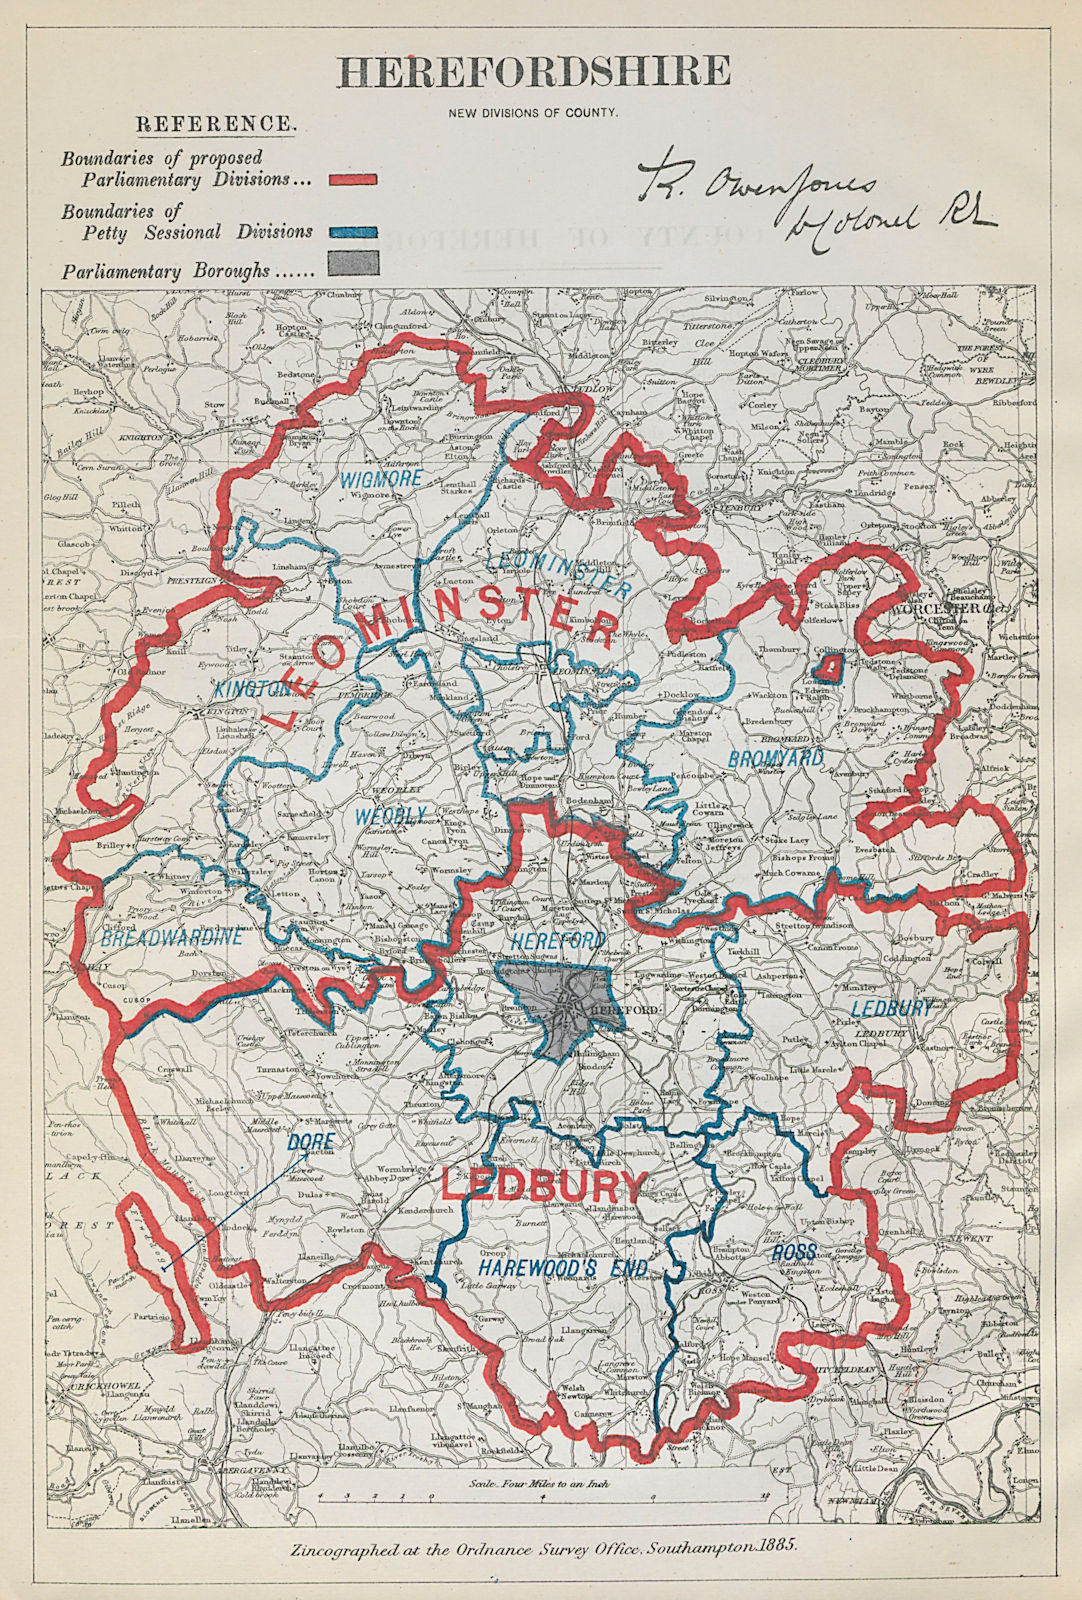 Associate Product Herefordshire Parliamentary Divisions. Leominster. BOUNDARY COMMISSION 1885 map